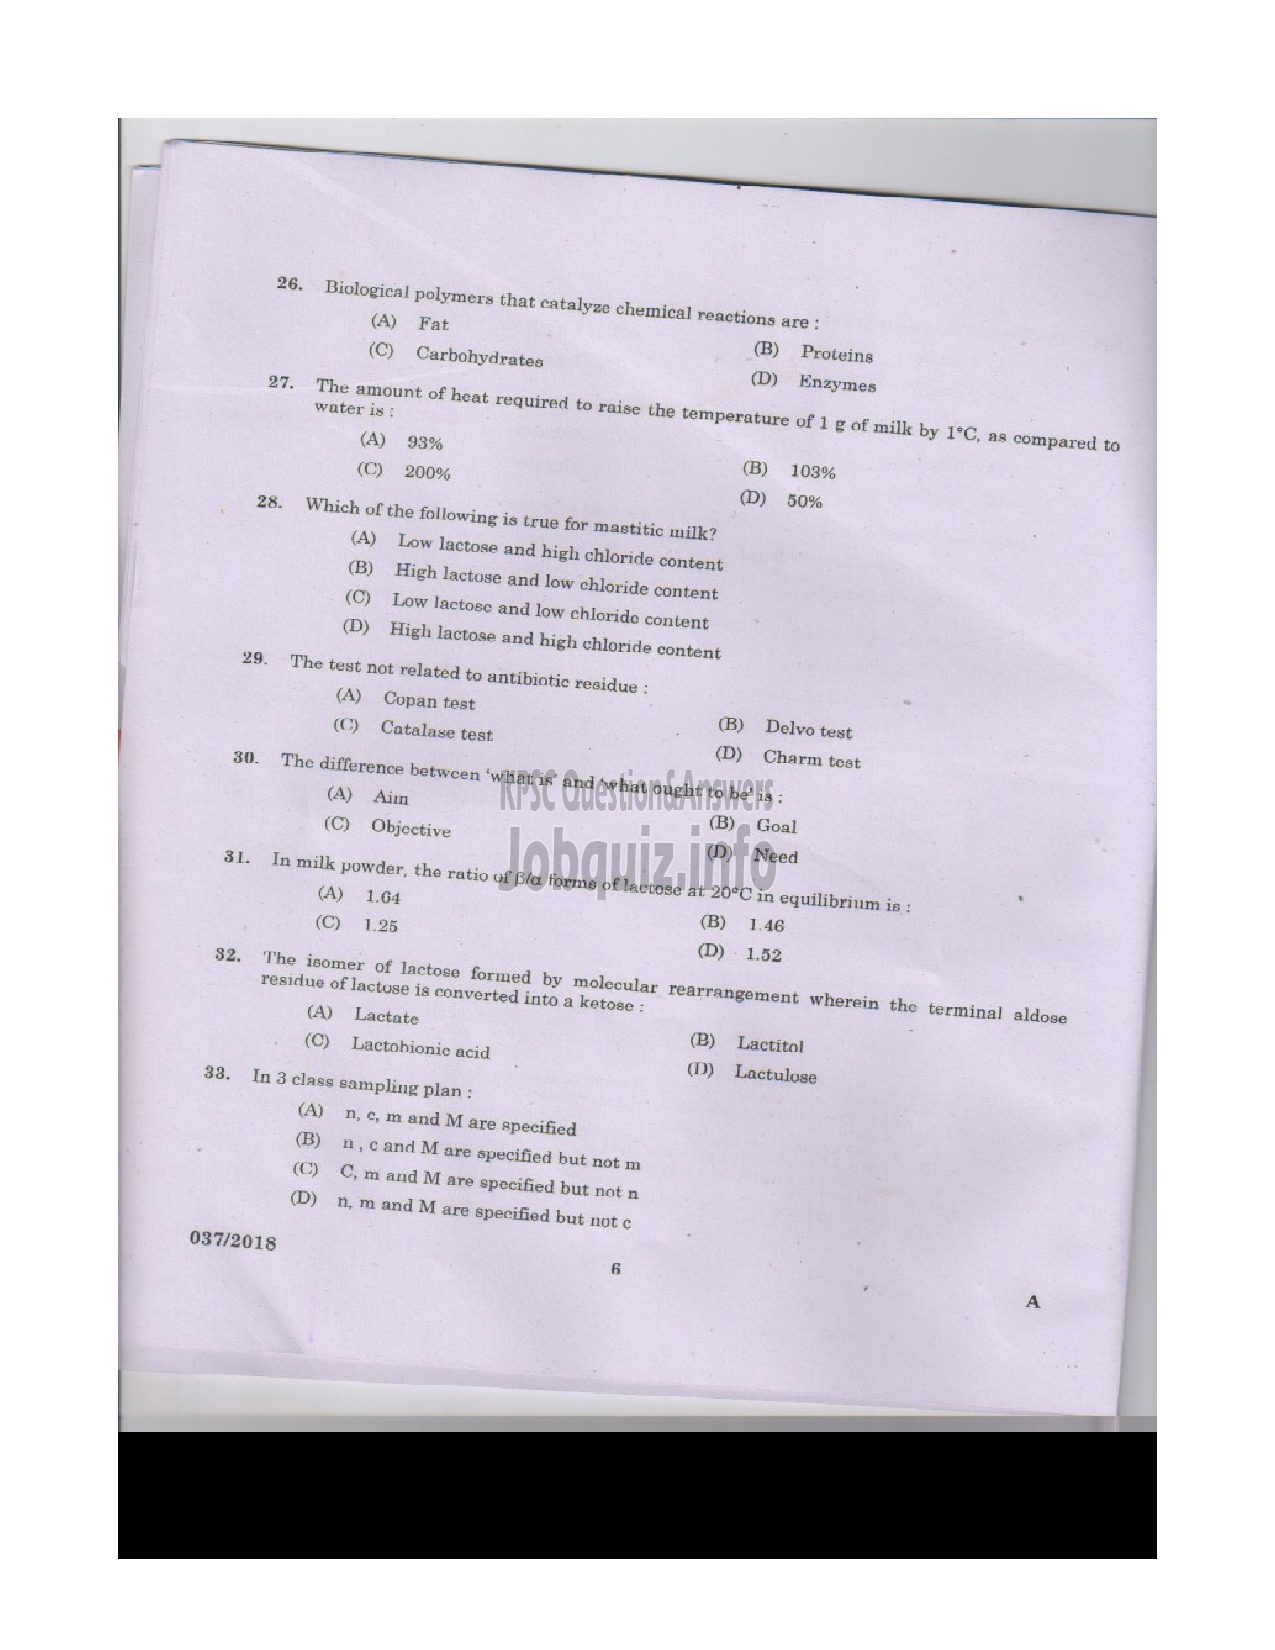 Kerala PSC Question Paper - VOCATIONAL INSTRUCTOR IN DAIRYING MILK PRODUCTS VHSE-5